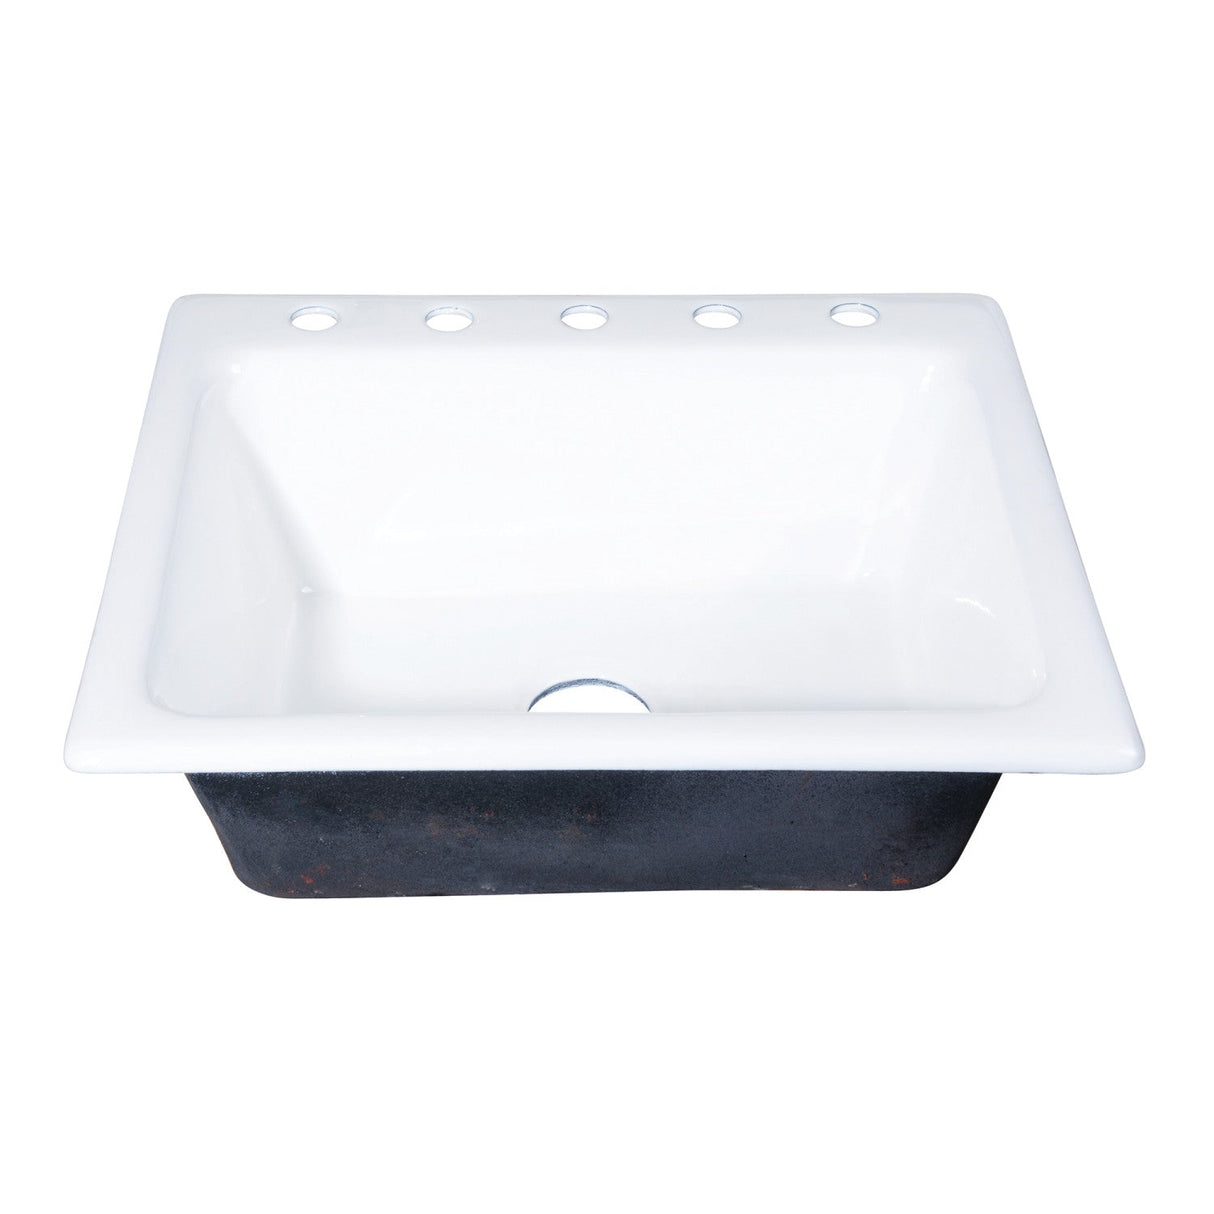 Towne GT252295 25-Inch Cast Iron Self-Rimming 5-Hole Single Bowl Drop-In Kitchen Sink, White